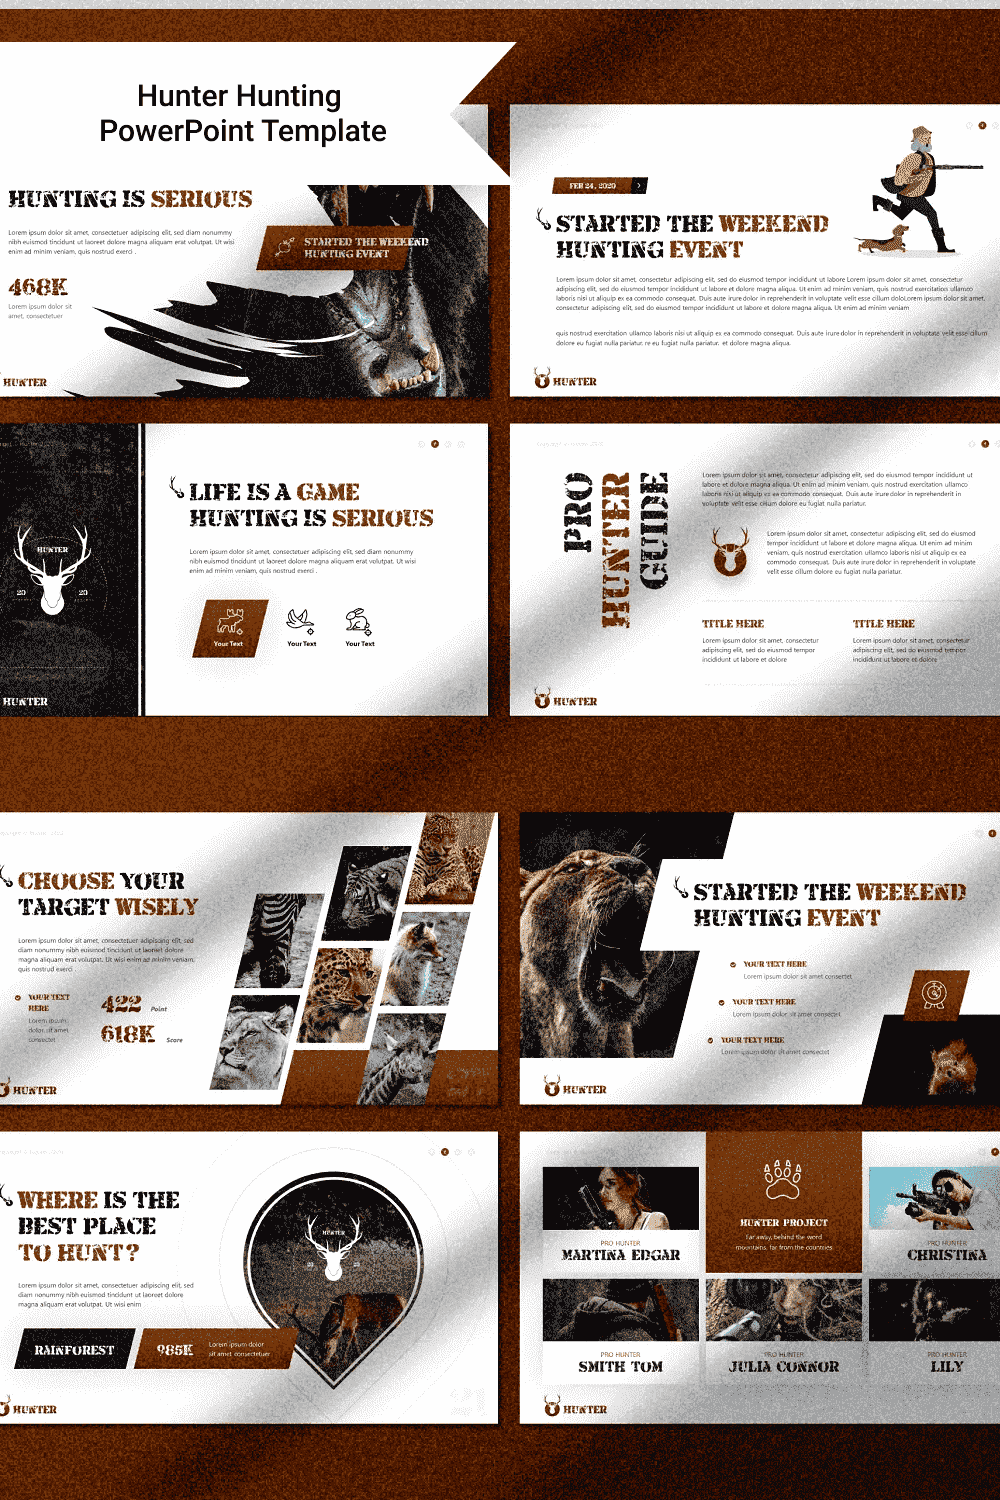 Hunter Hunting - Powerpoint Template - "Life Is A Game, Hunting Is Serious".